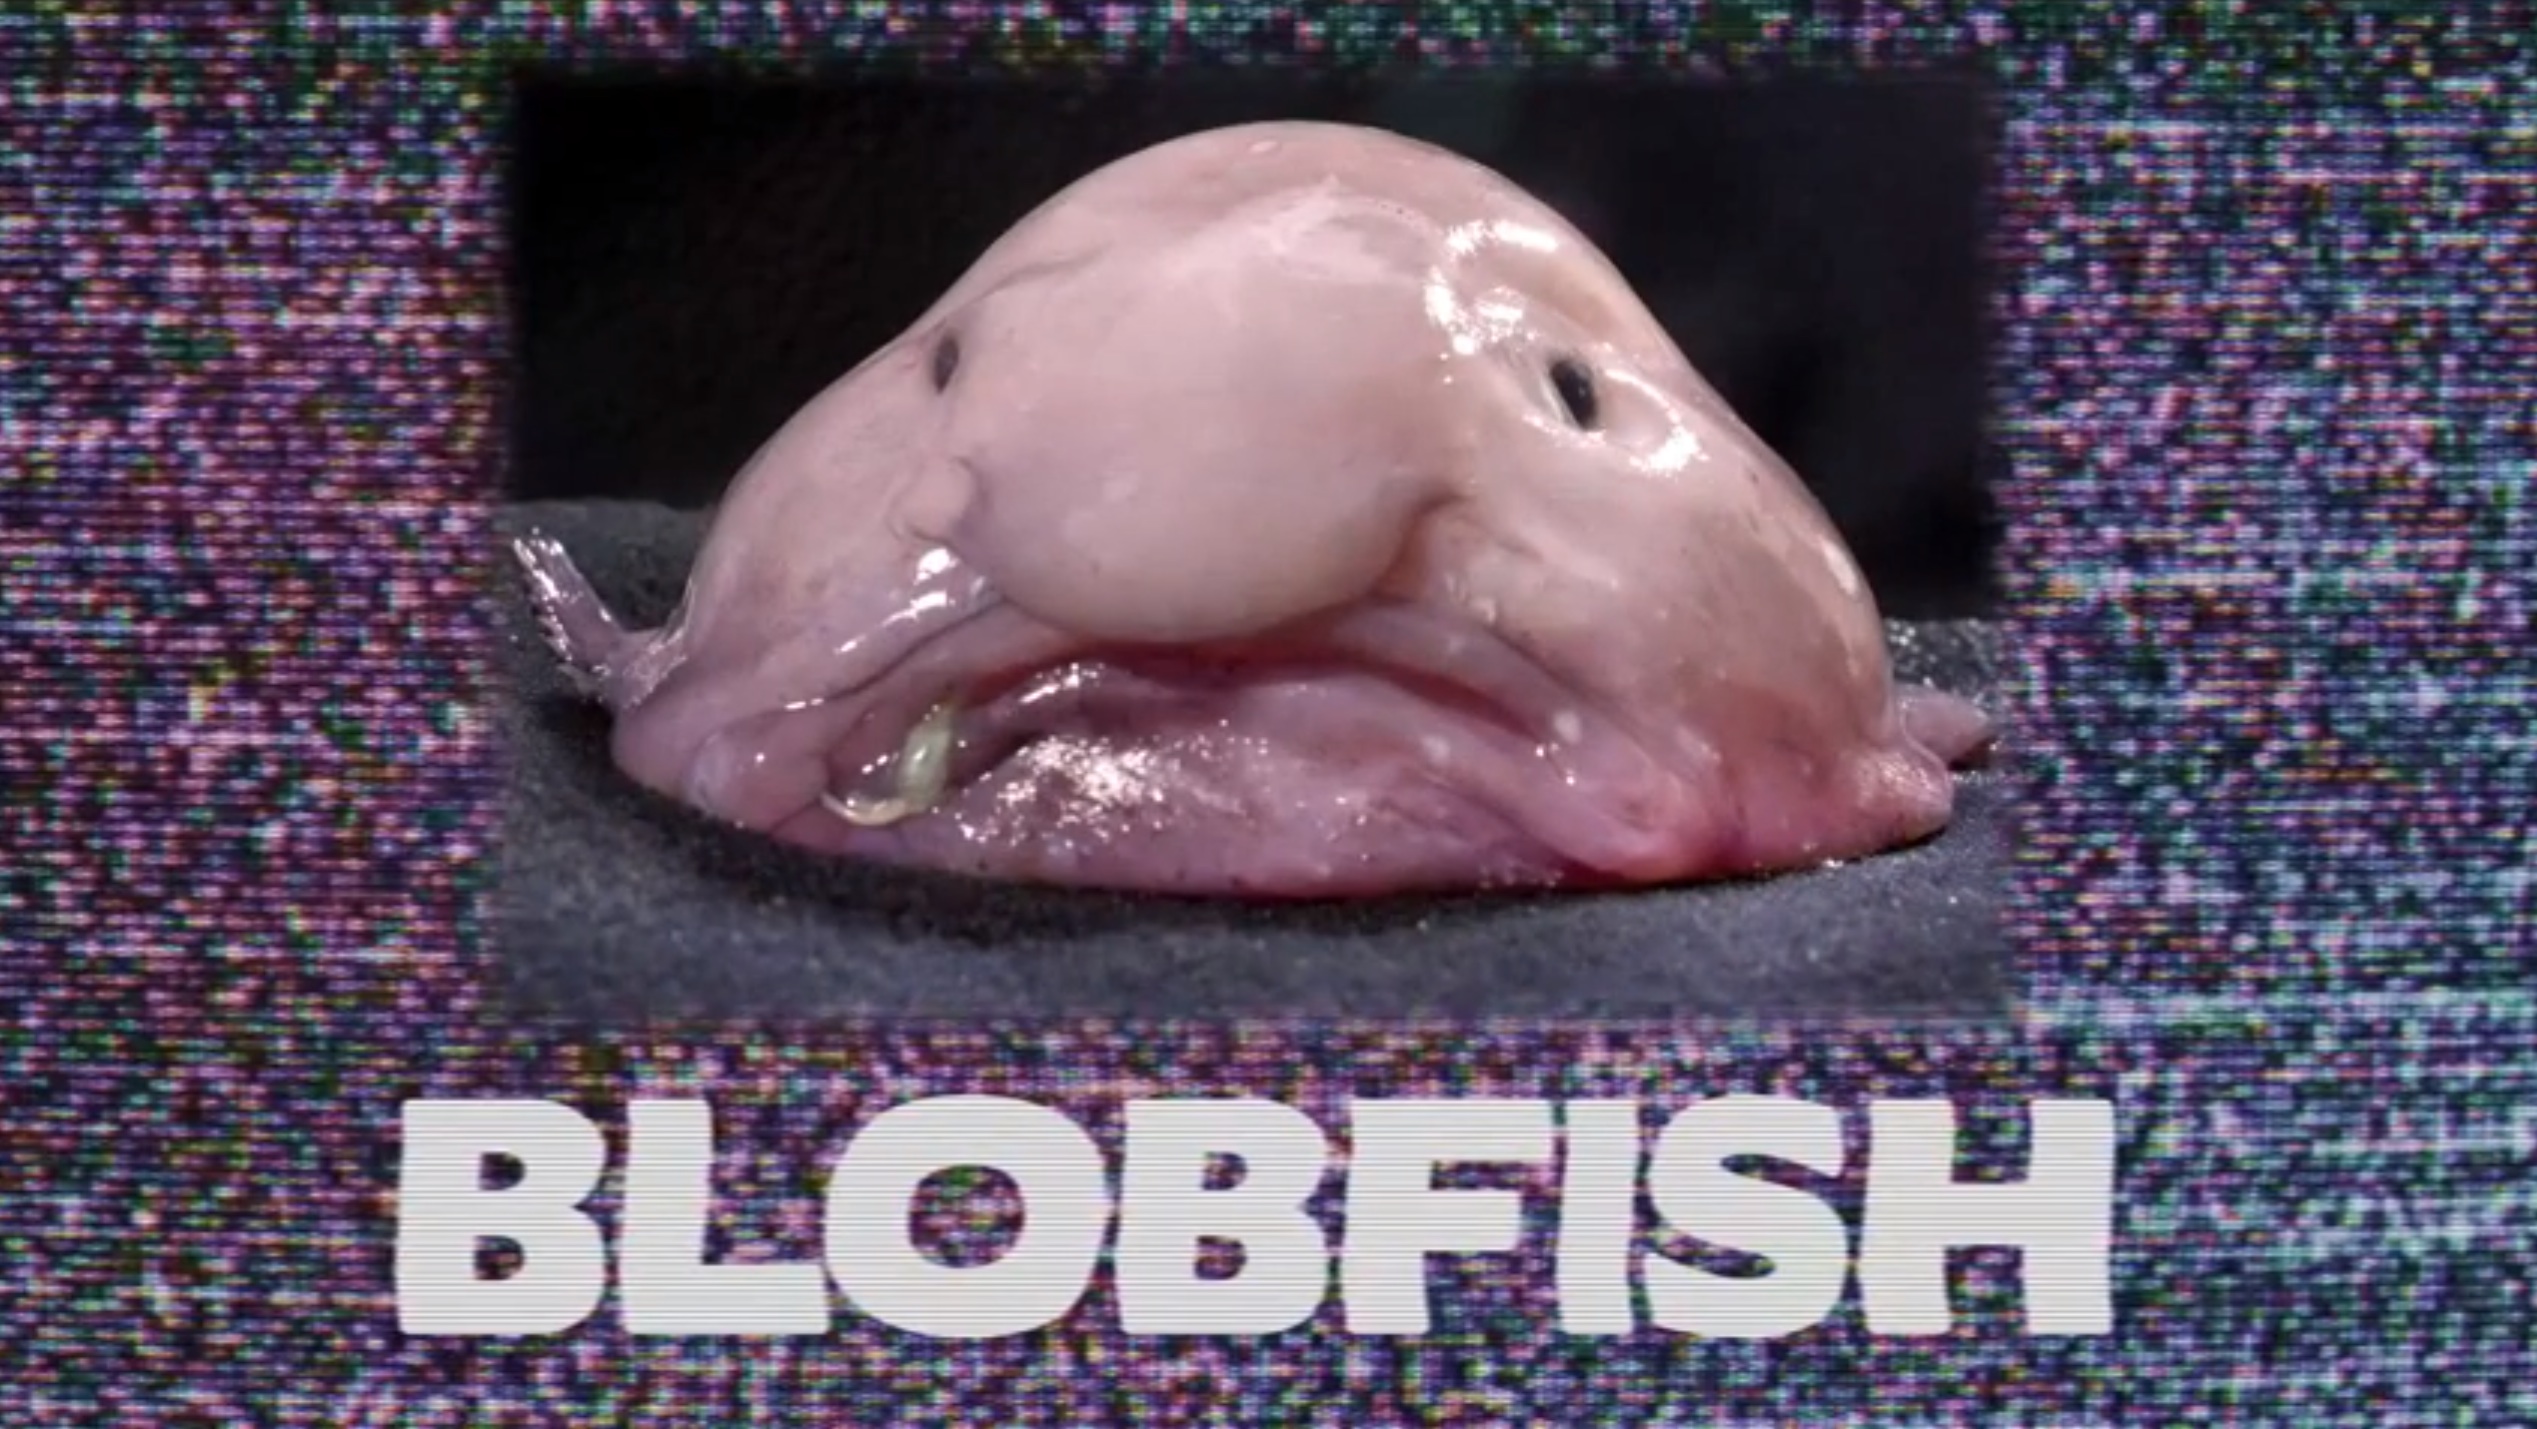 What the Heck Is a Blobfish? | Live Science